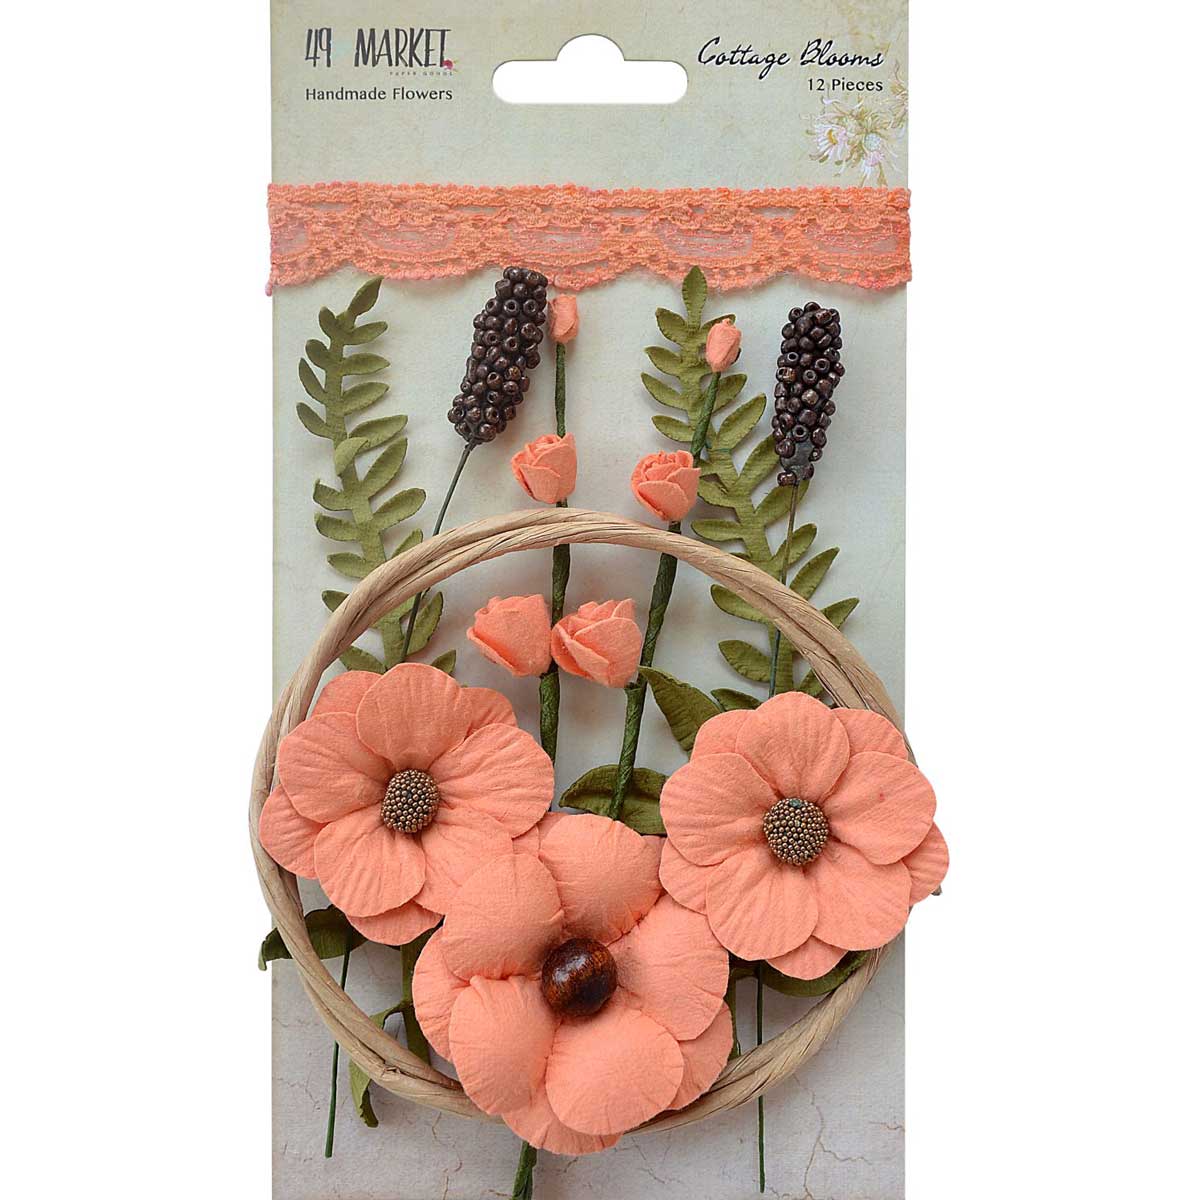 DISCONTINUED - Cottage Blooms - Cantaloupe